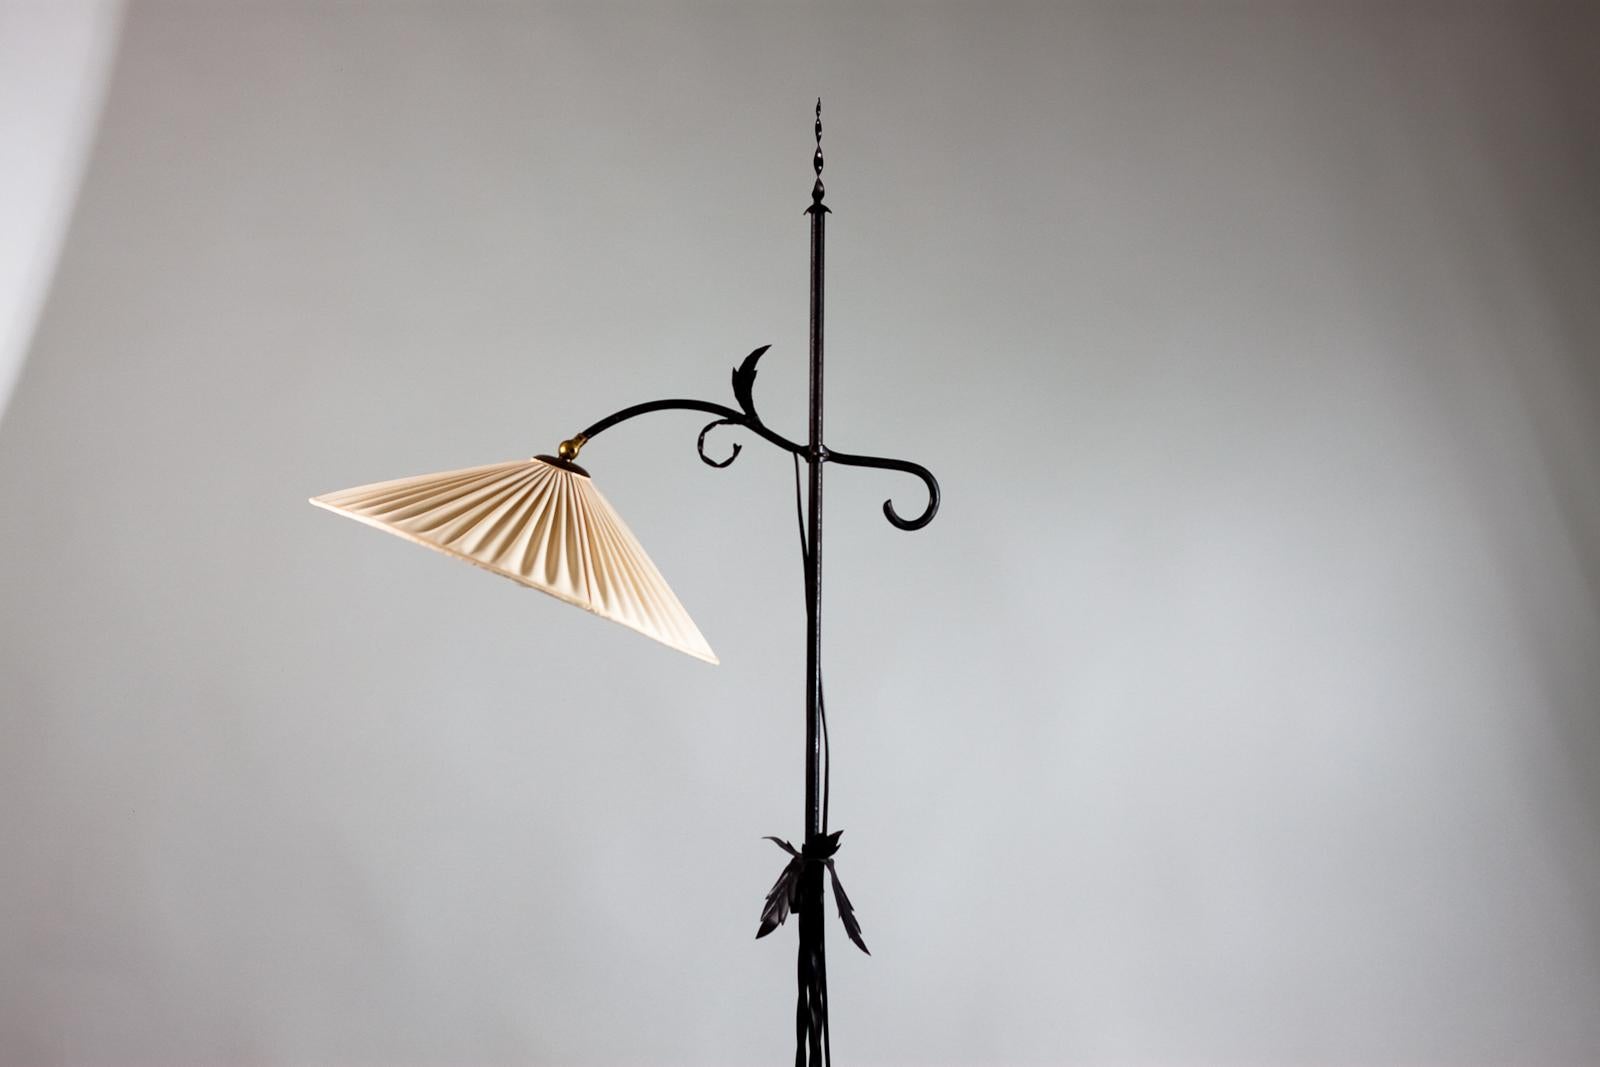 Beautiful wrought iron floor lamp by Antti Hakkarainen for Taidetakomo Hakkarainen in the 1930s, Finland. The floor lamp can be adjusted in hight. 
The beauty is in the details of the lamp. The lamp has an original shade made of fabric.